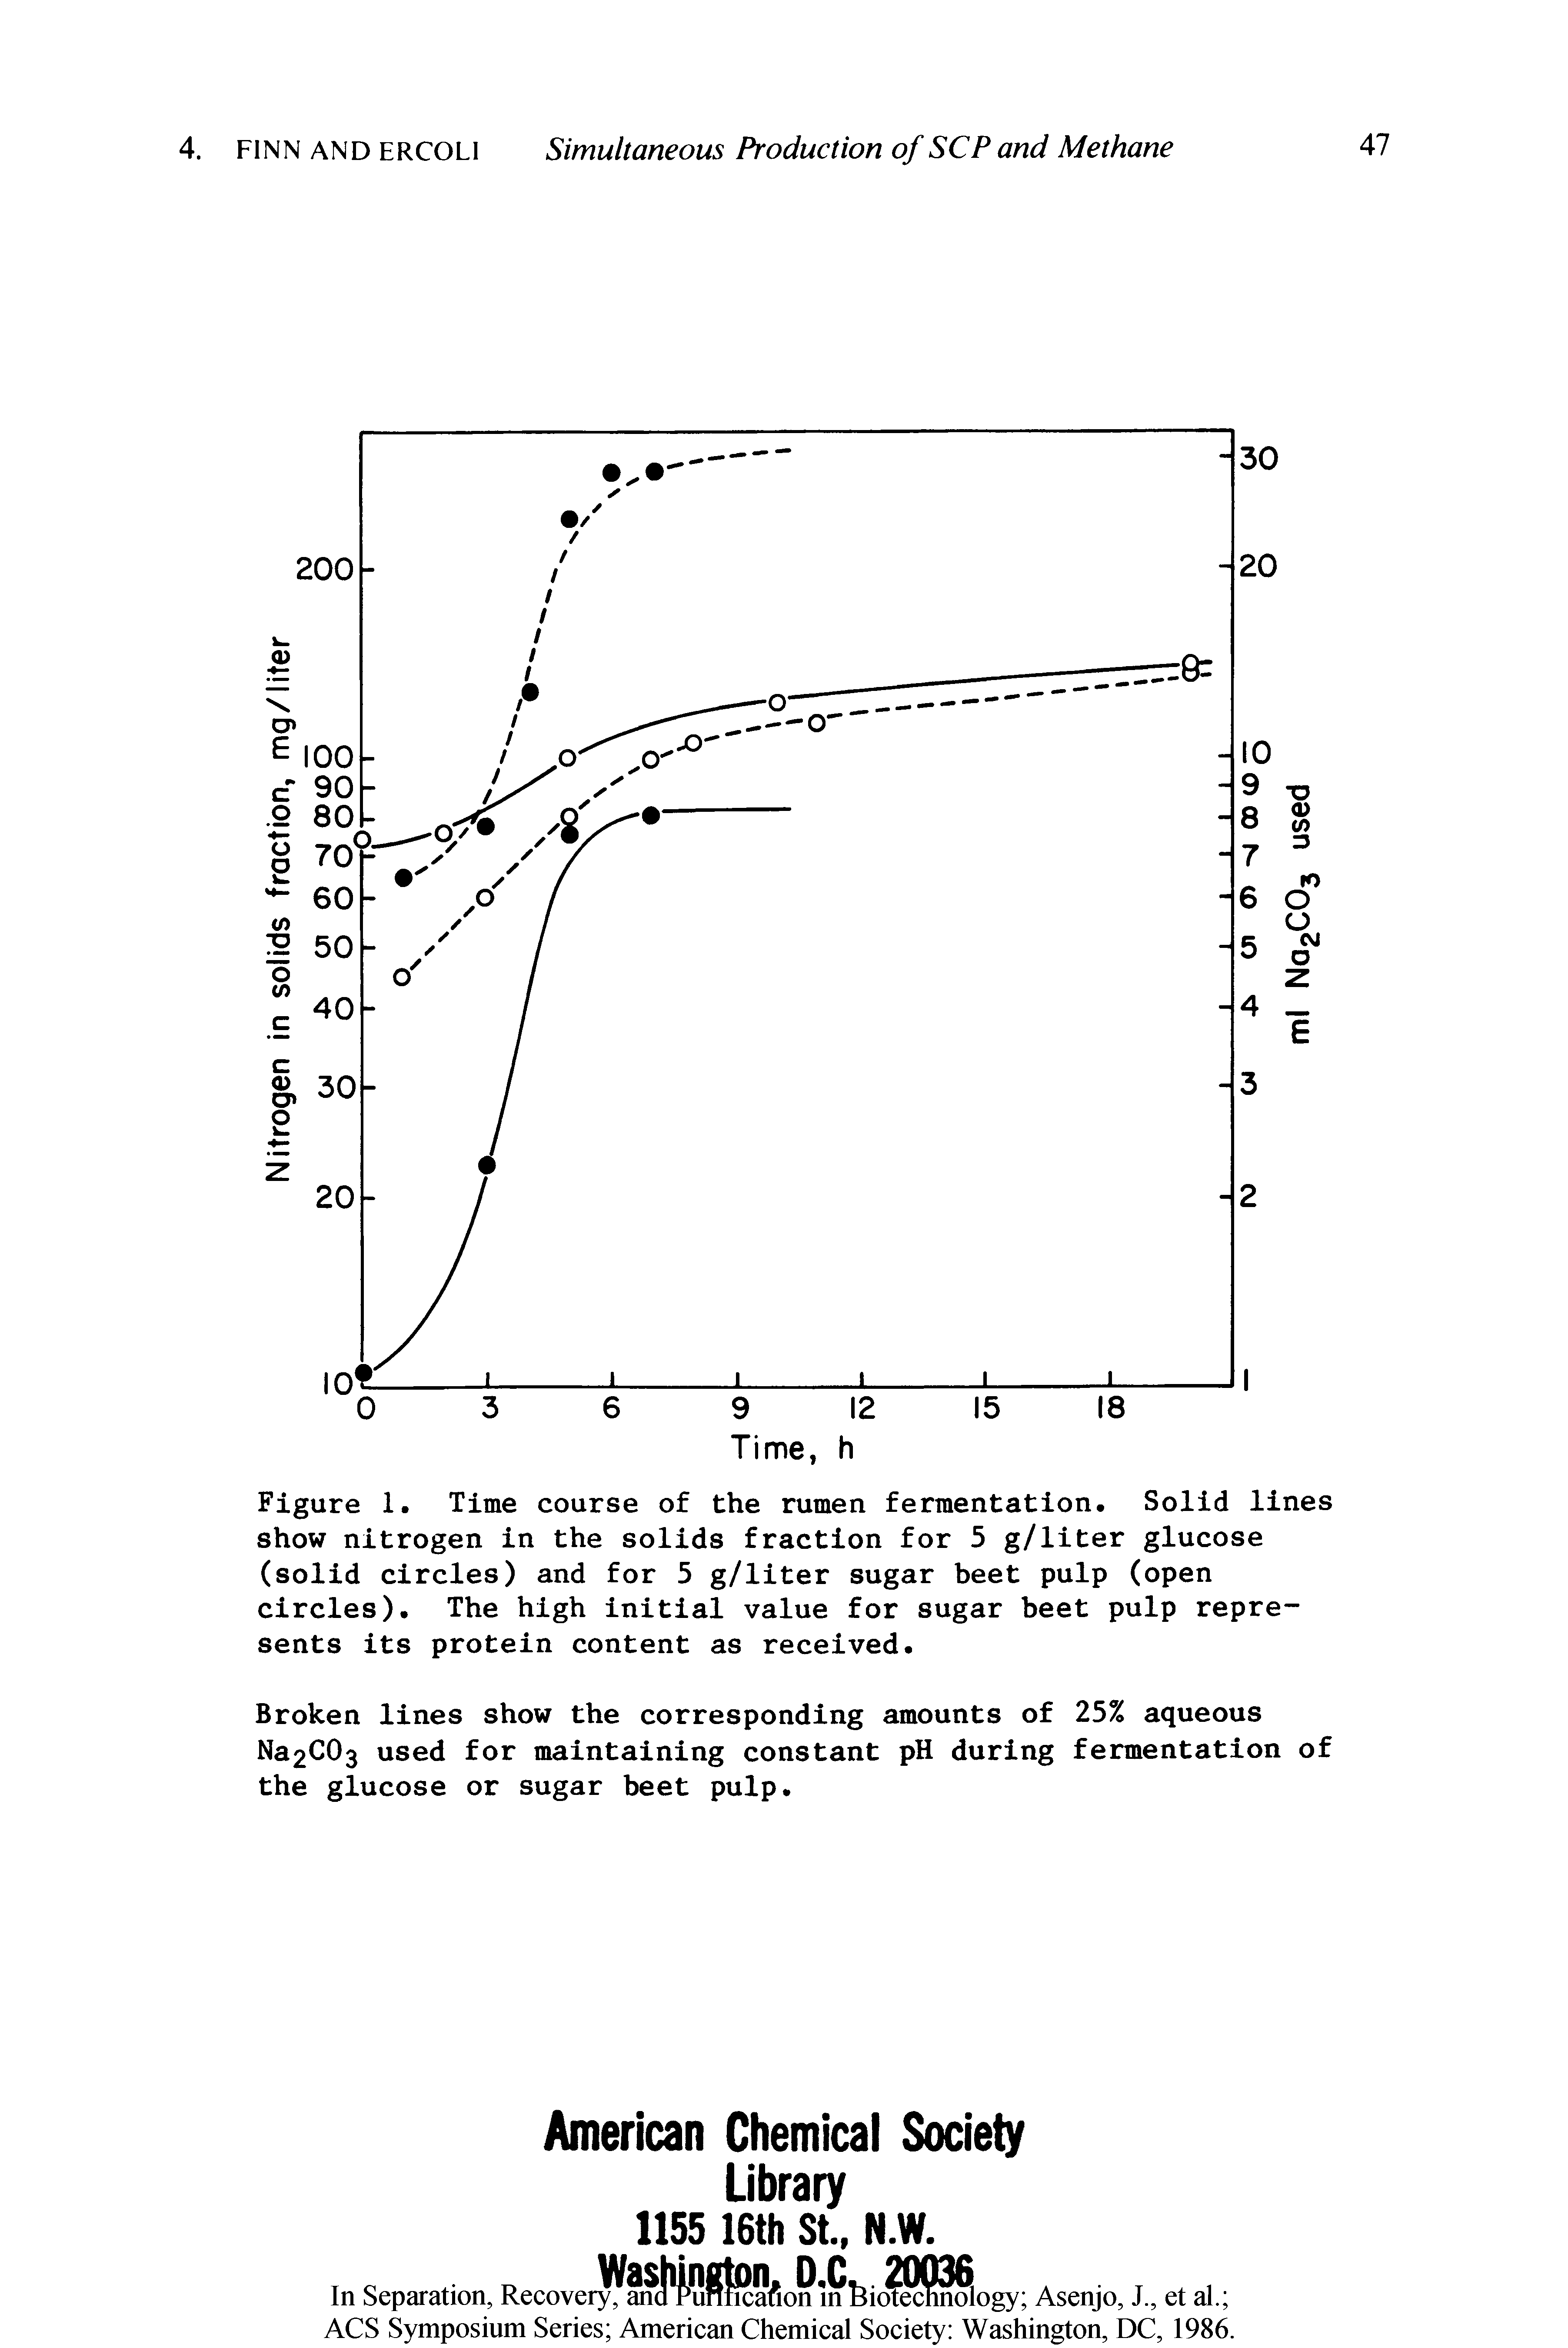 Figure 1. Time course of the rumen fermentation. Solid lines show nitrogen in the solids fraction for 5 g/liter glucose (solid circles) and for 5 g/liter sugar beet pulp (open circles). The high initial value for sugar beet pulp represents its protein content as received.